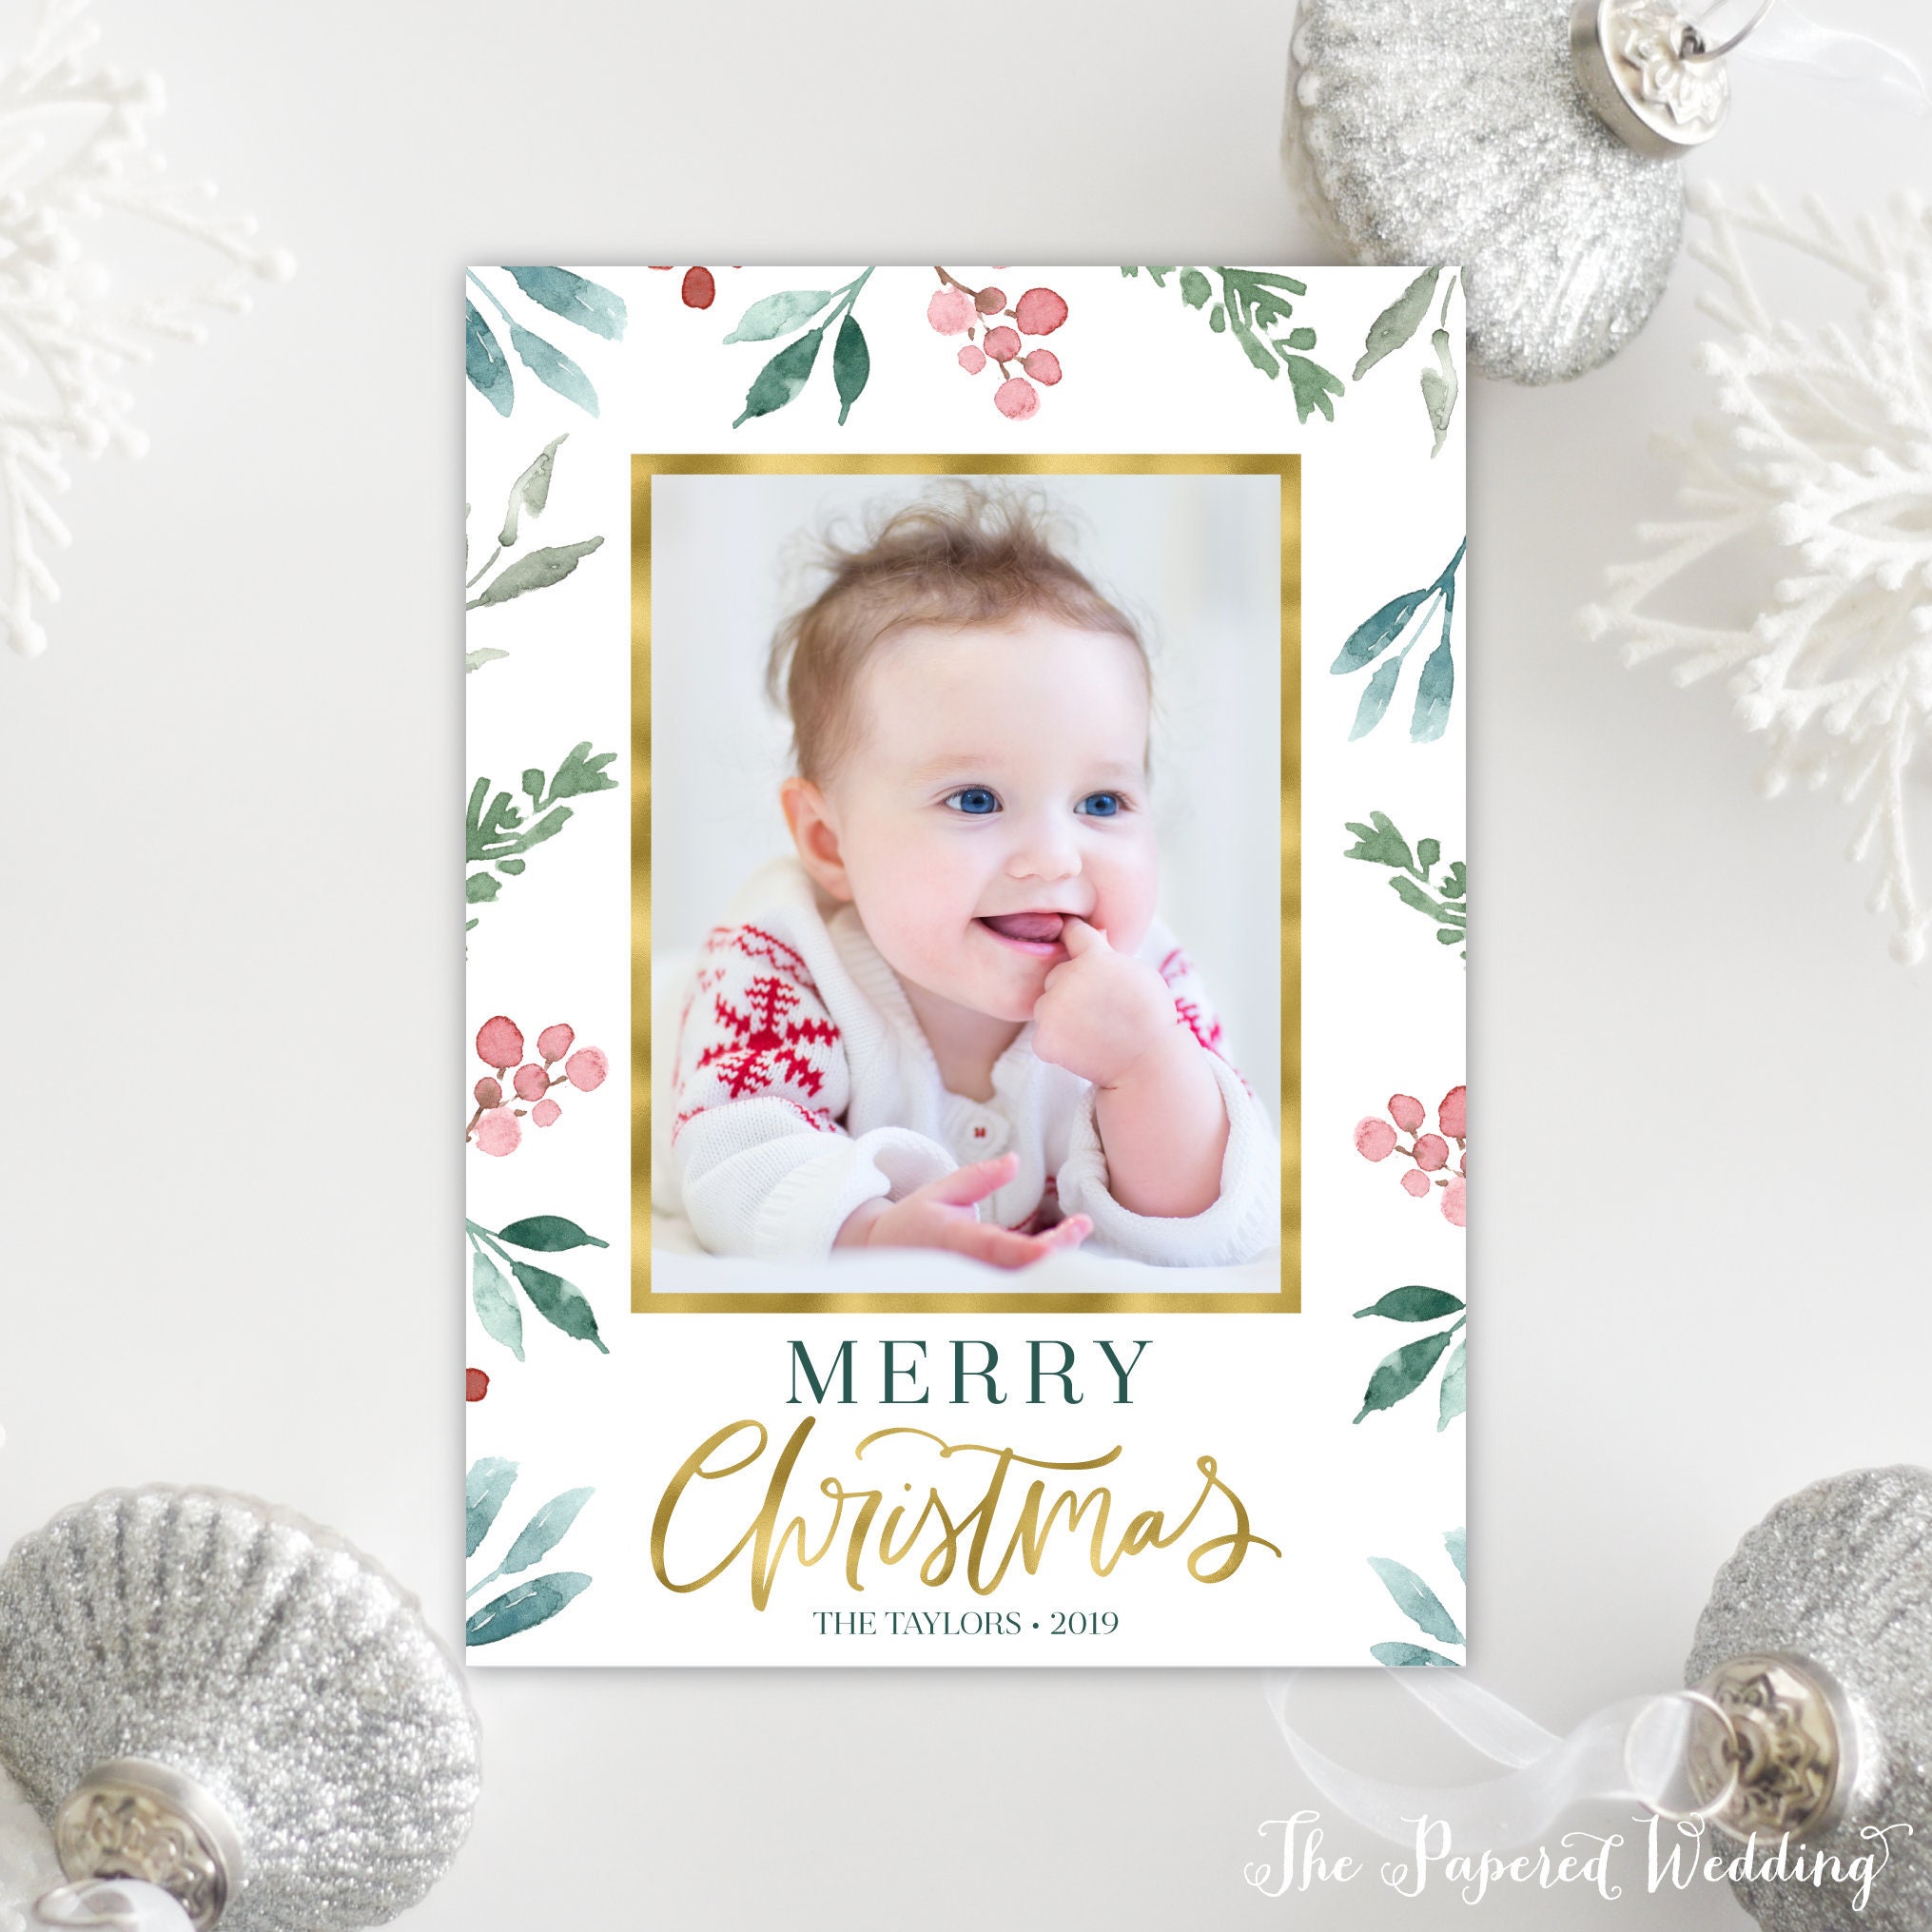 Printable Or Printed Red & Green Picture Christmas Cards With Faux Gold Foil - Photo Holiday with Greenery & Berries 096 P1